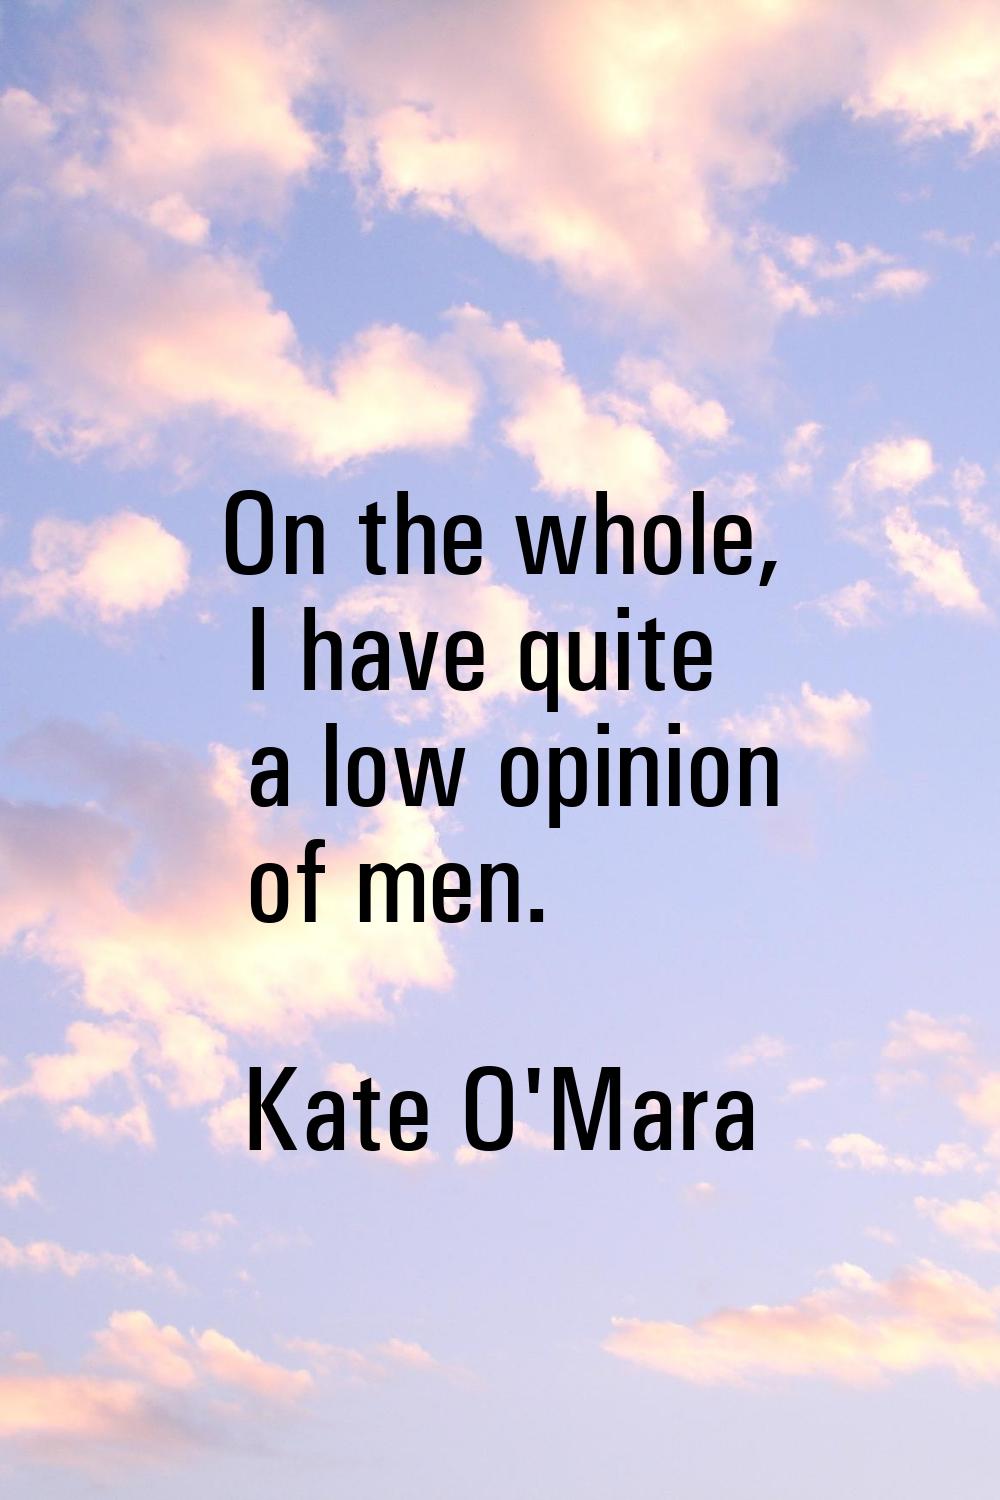 On the whole, I have quite a low opinion of men.